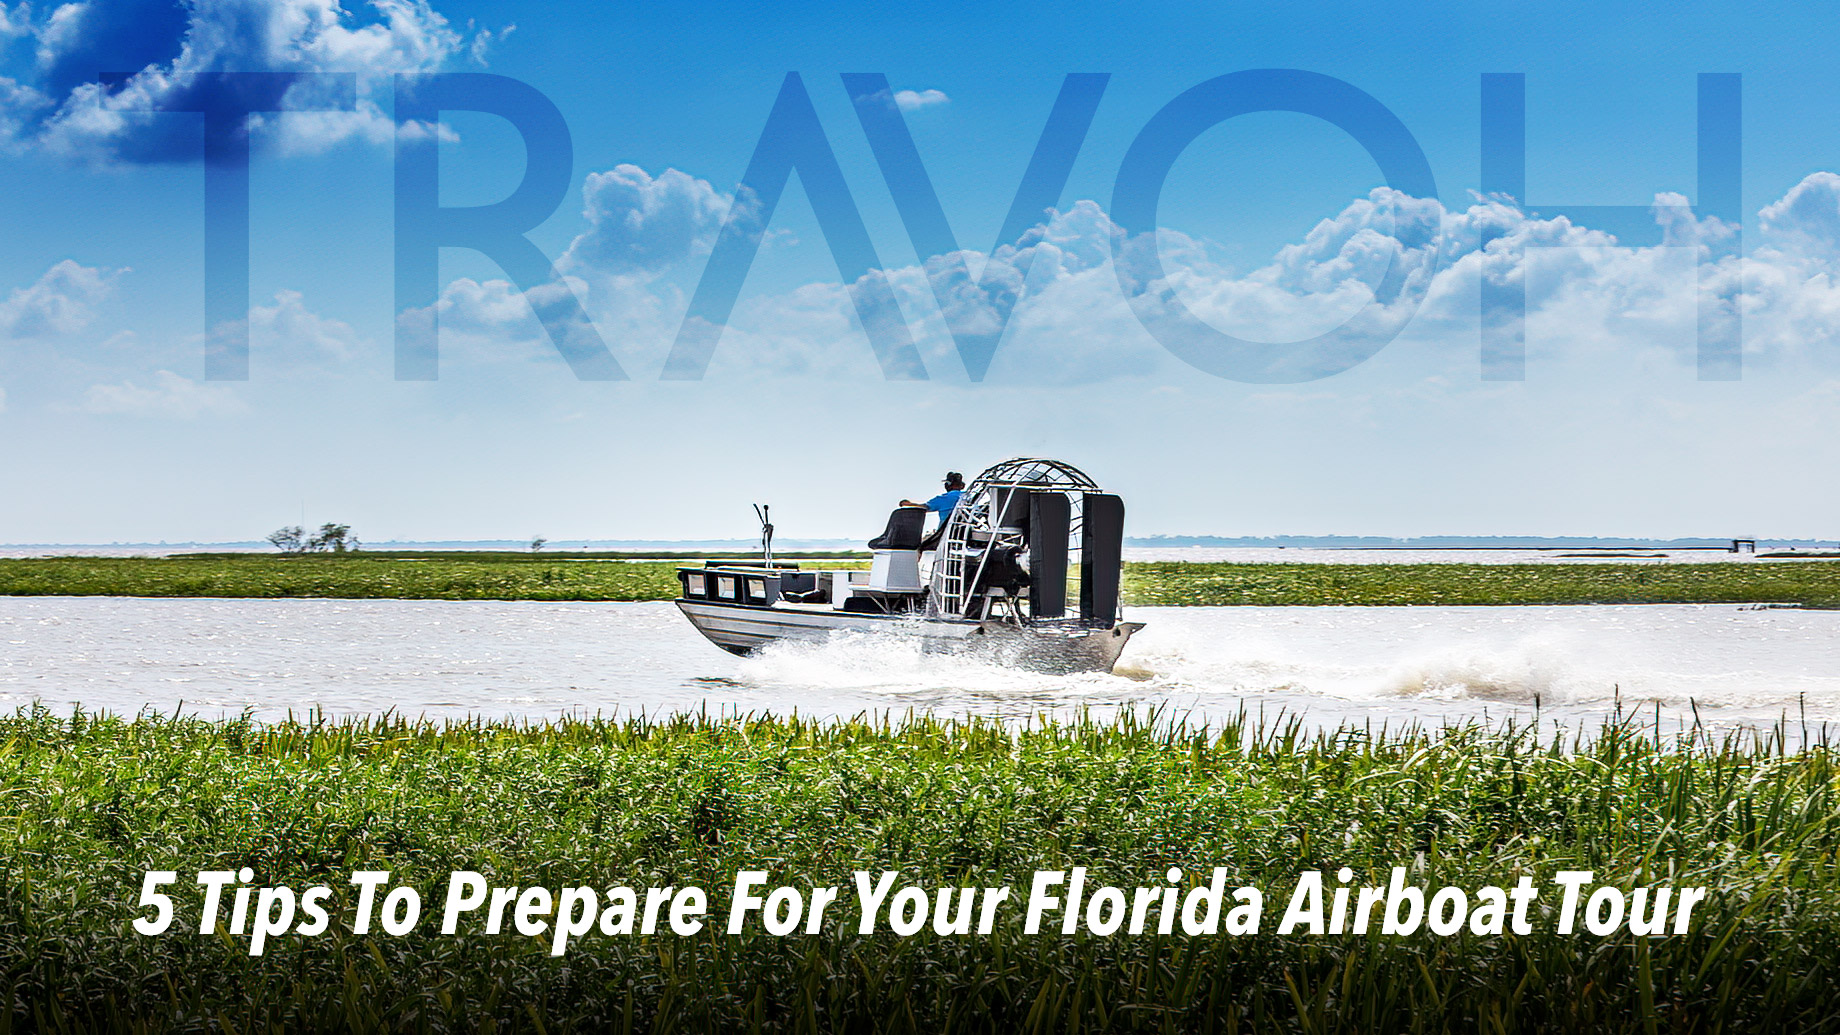 5 Tips To Prepare For Your Florida Airboat Tour